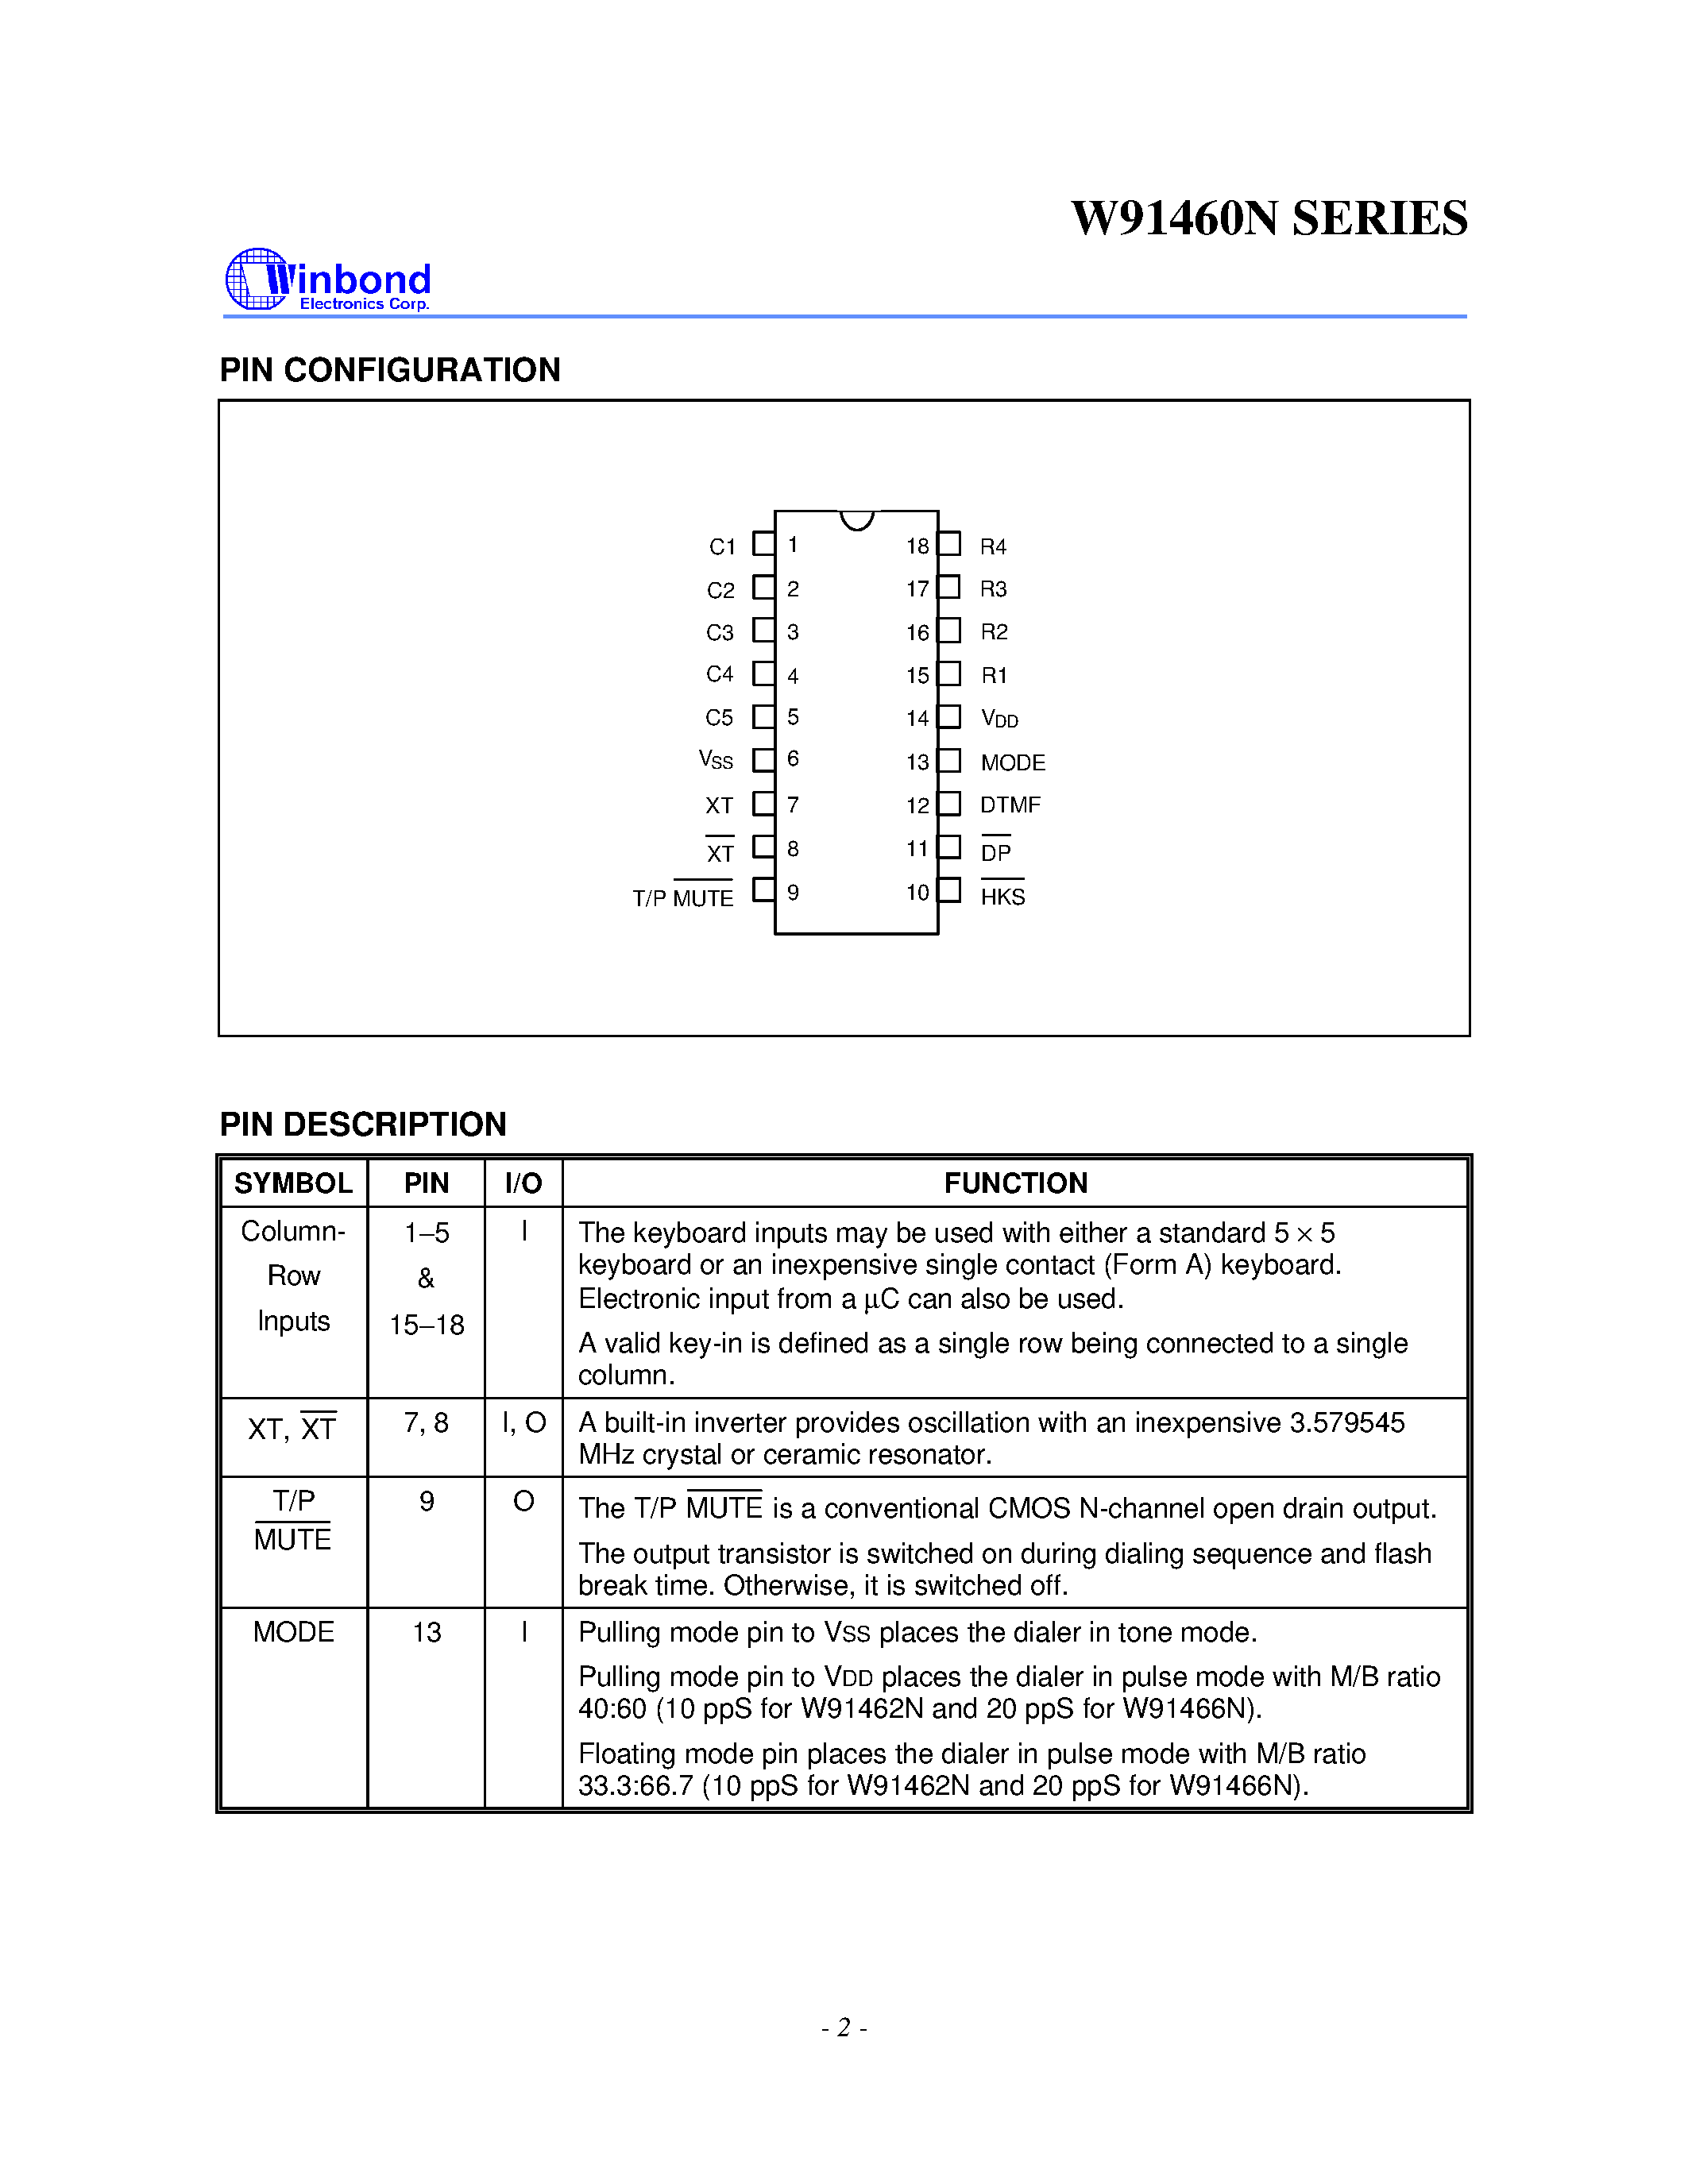 Datasheet W91466N - 3-MEMORY TONE/PULSE DIALER WITH SAVE FUNCTION page 2